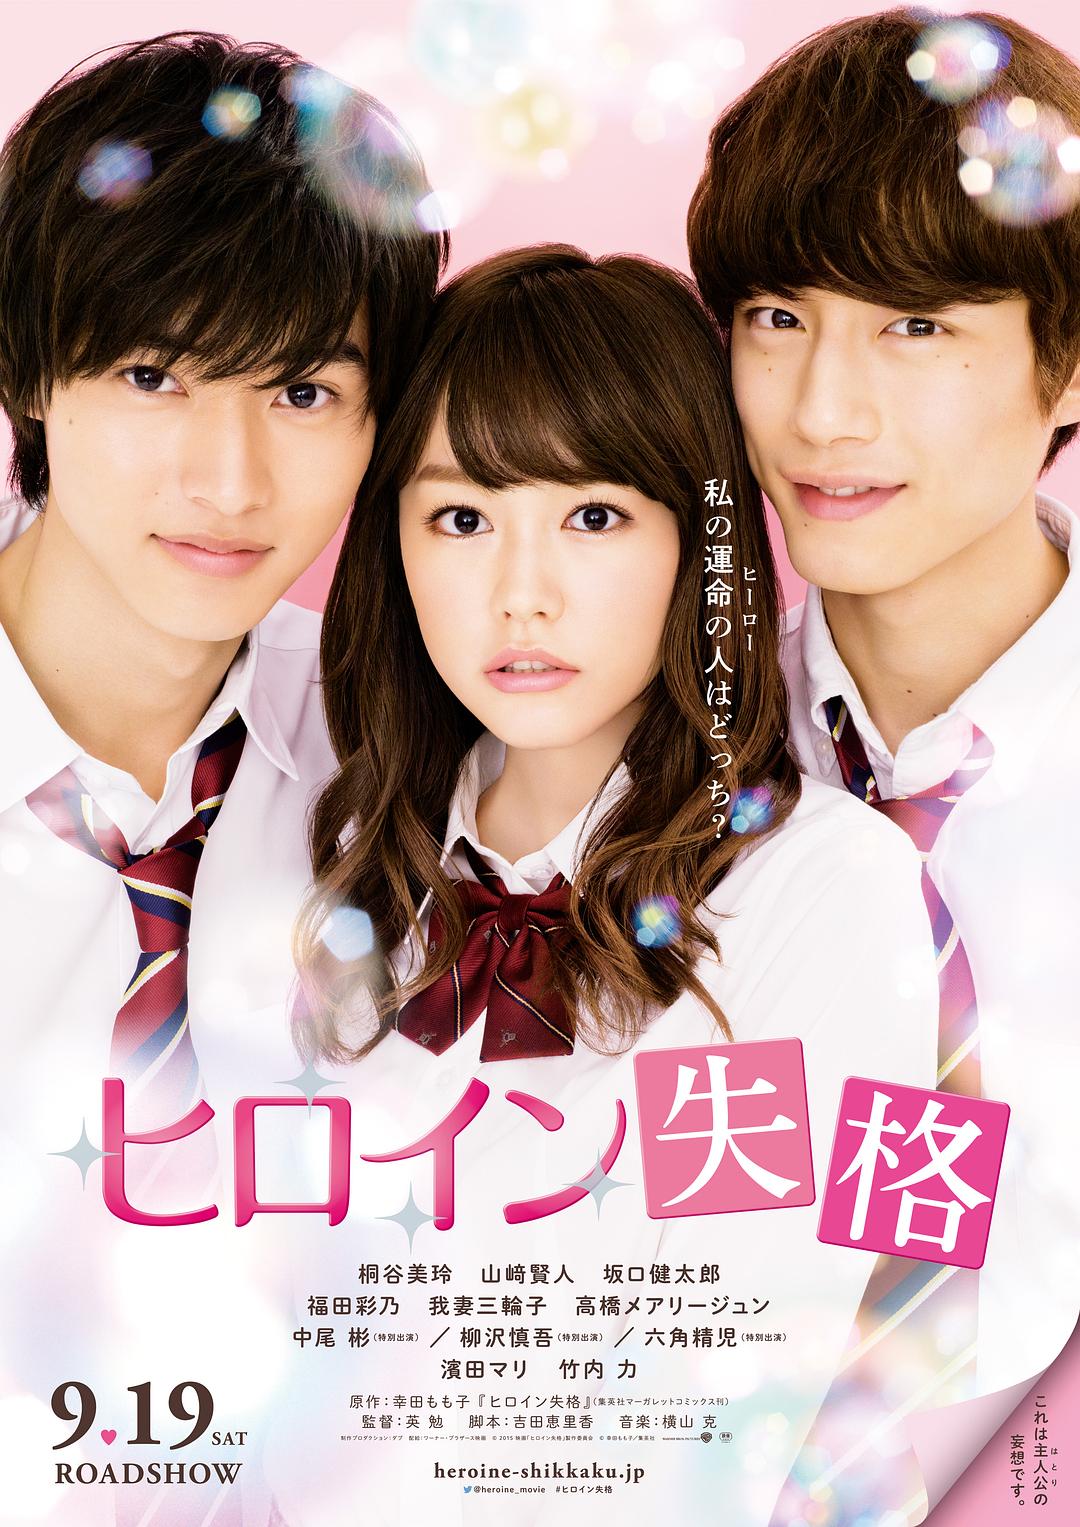 Ůʧ Heroine.Disqualified.2015.JAPANESE.1080p.BluRay.x264.DTS-iKiW 10.00GB-1.png